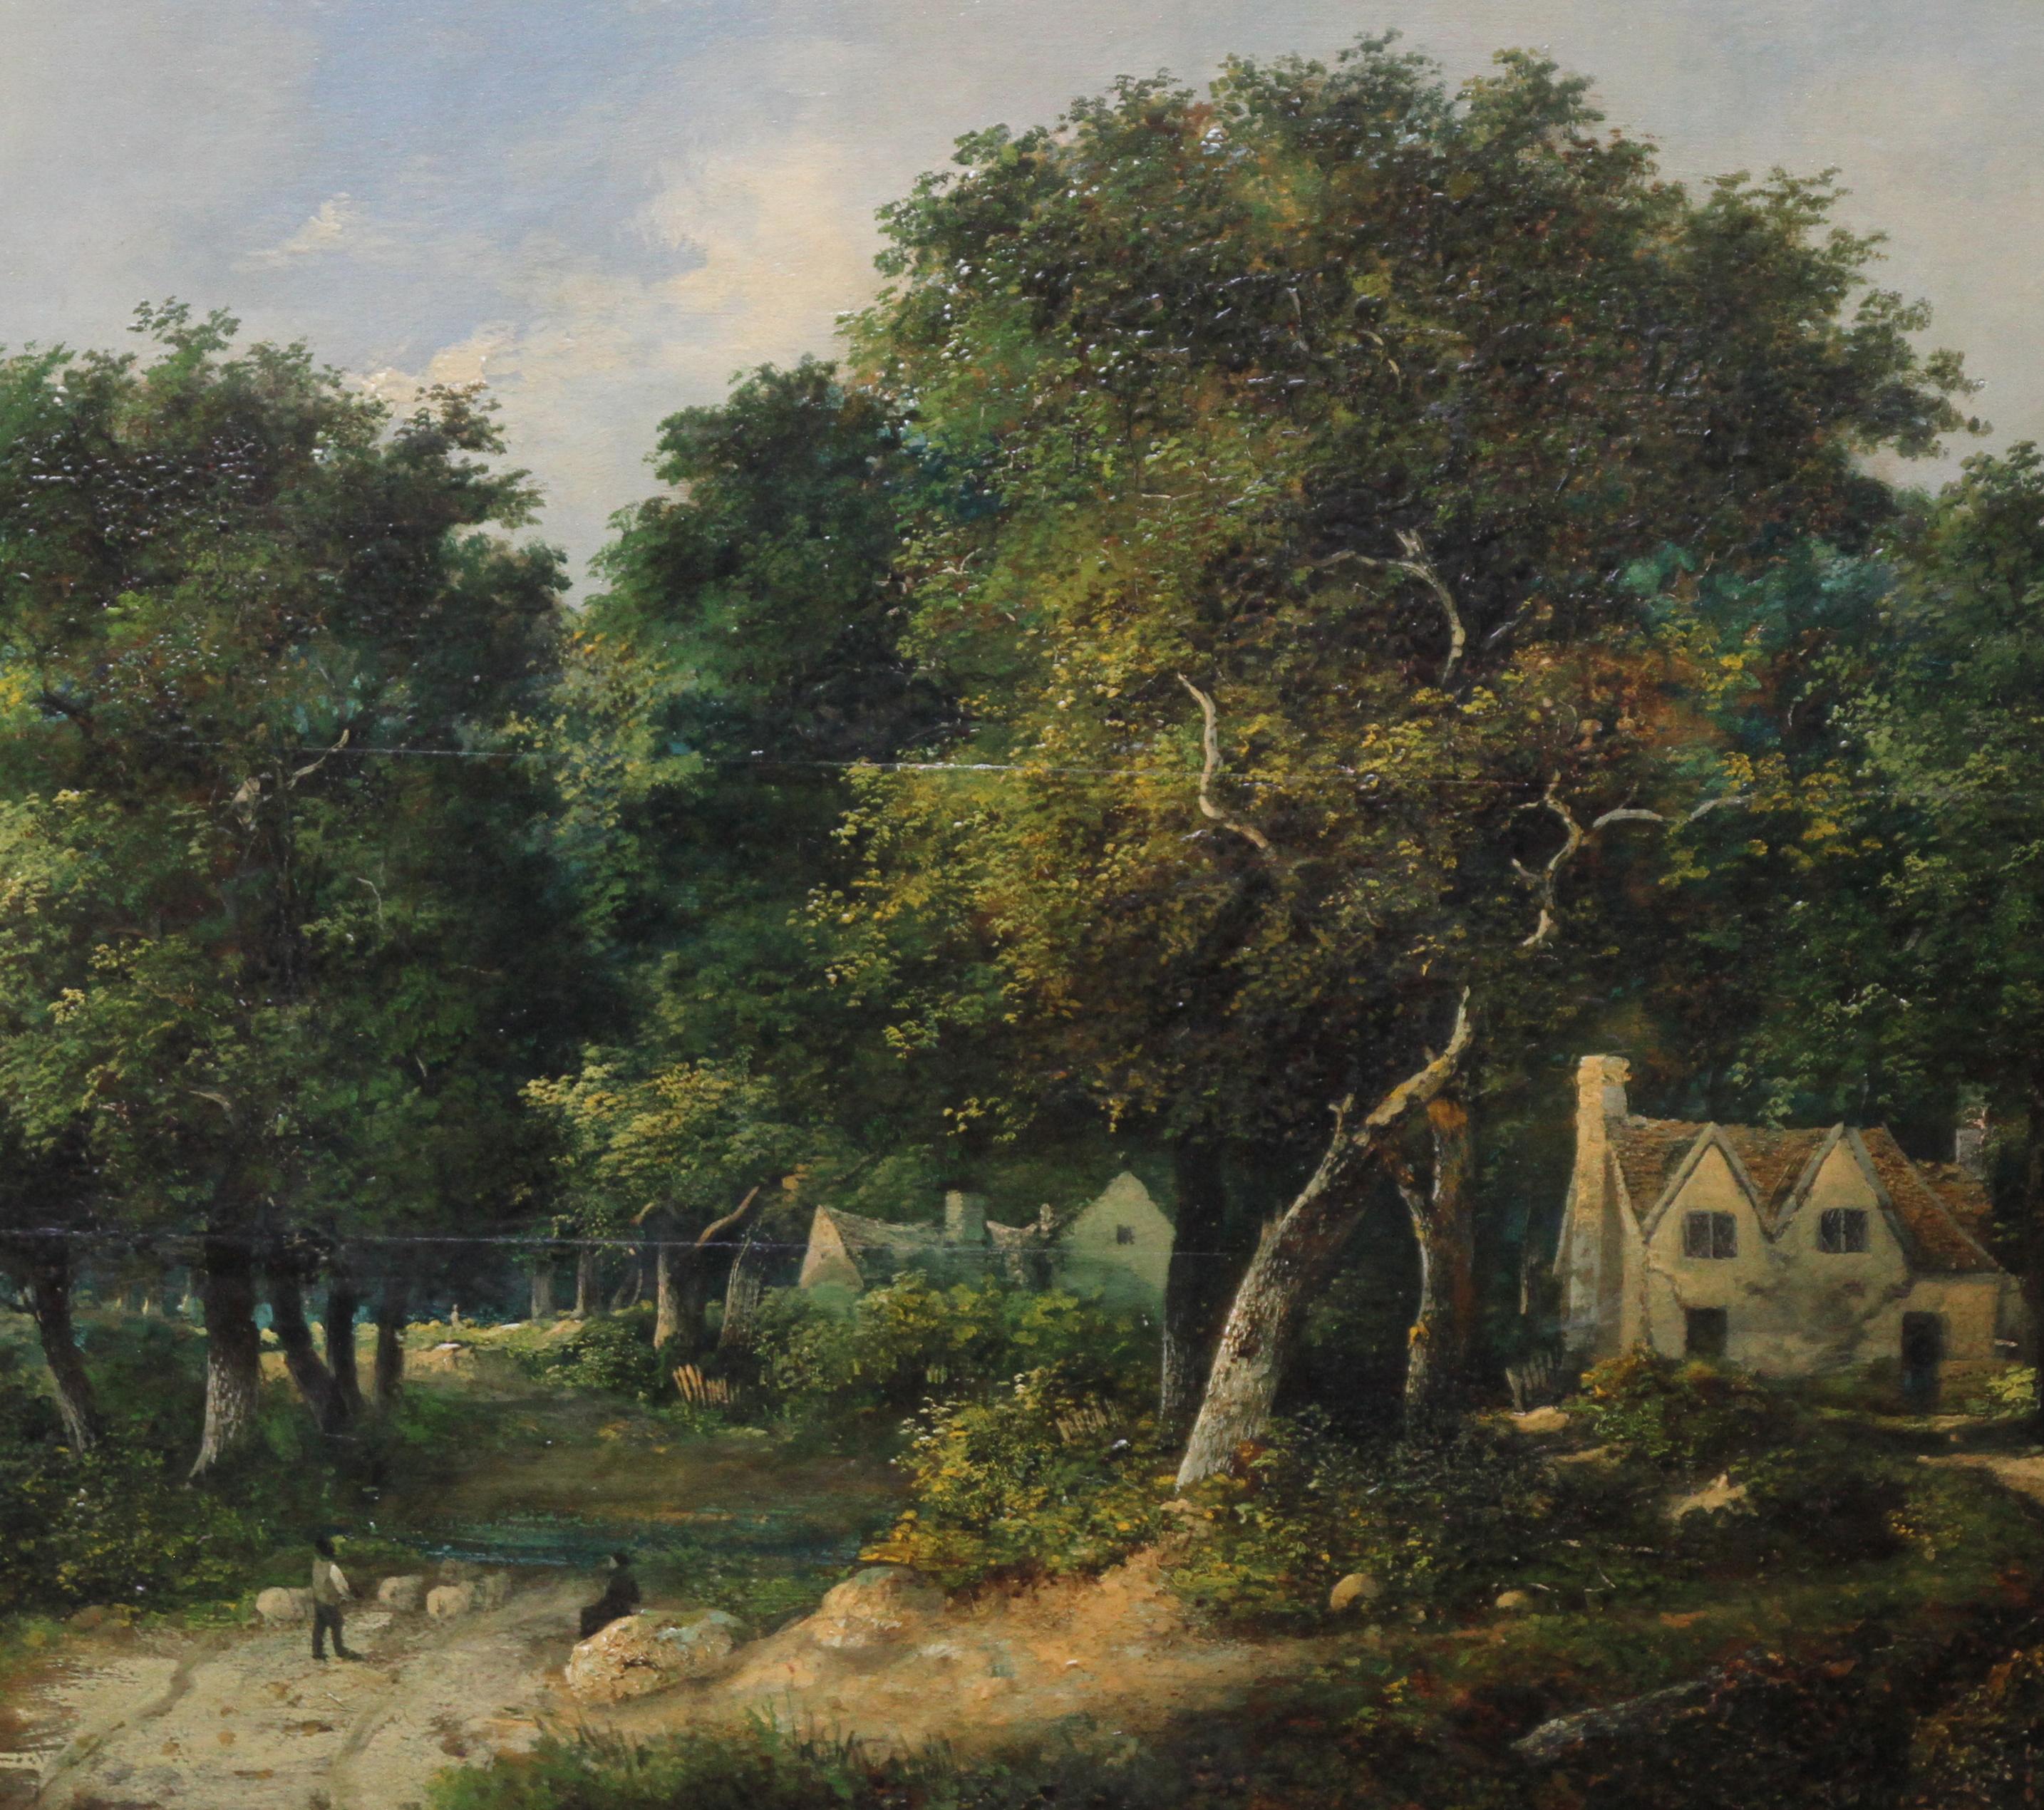 This superb oil on panel painting is by British Victorian artist William Henry Crome, son of artist John Crome, founder of the Norwich School. Painted circa 1850 the painting depicts a wooded landscape with a shepherd driving sheep along a lane past